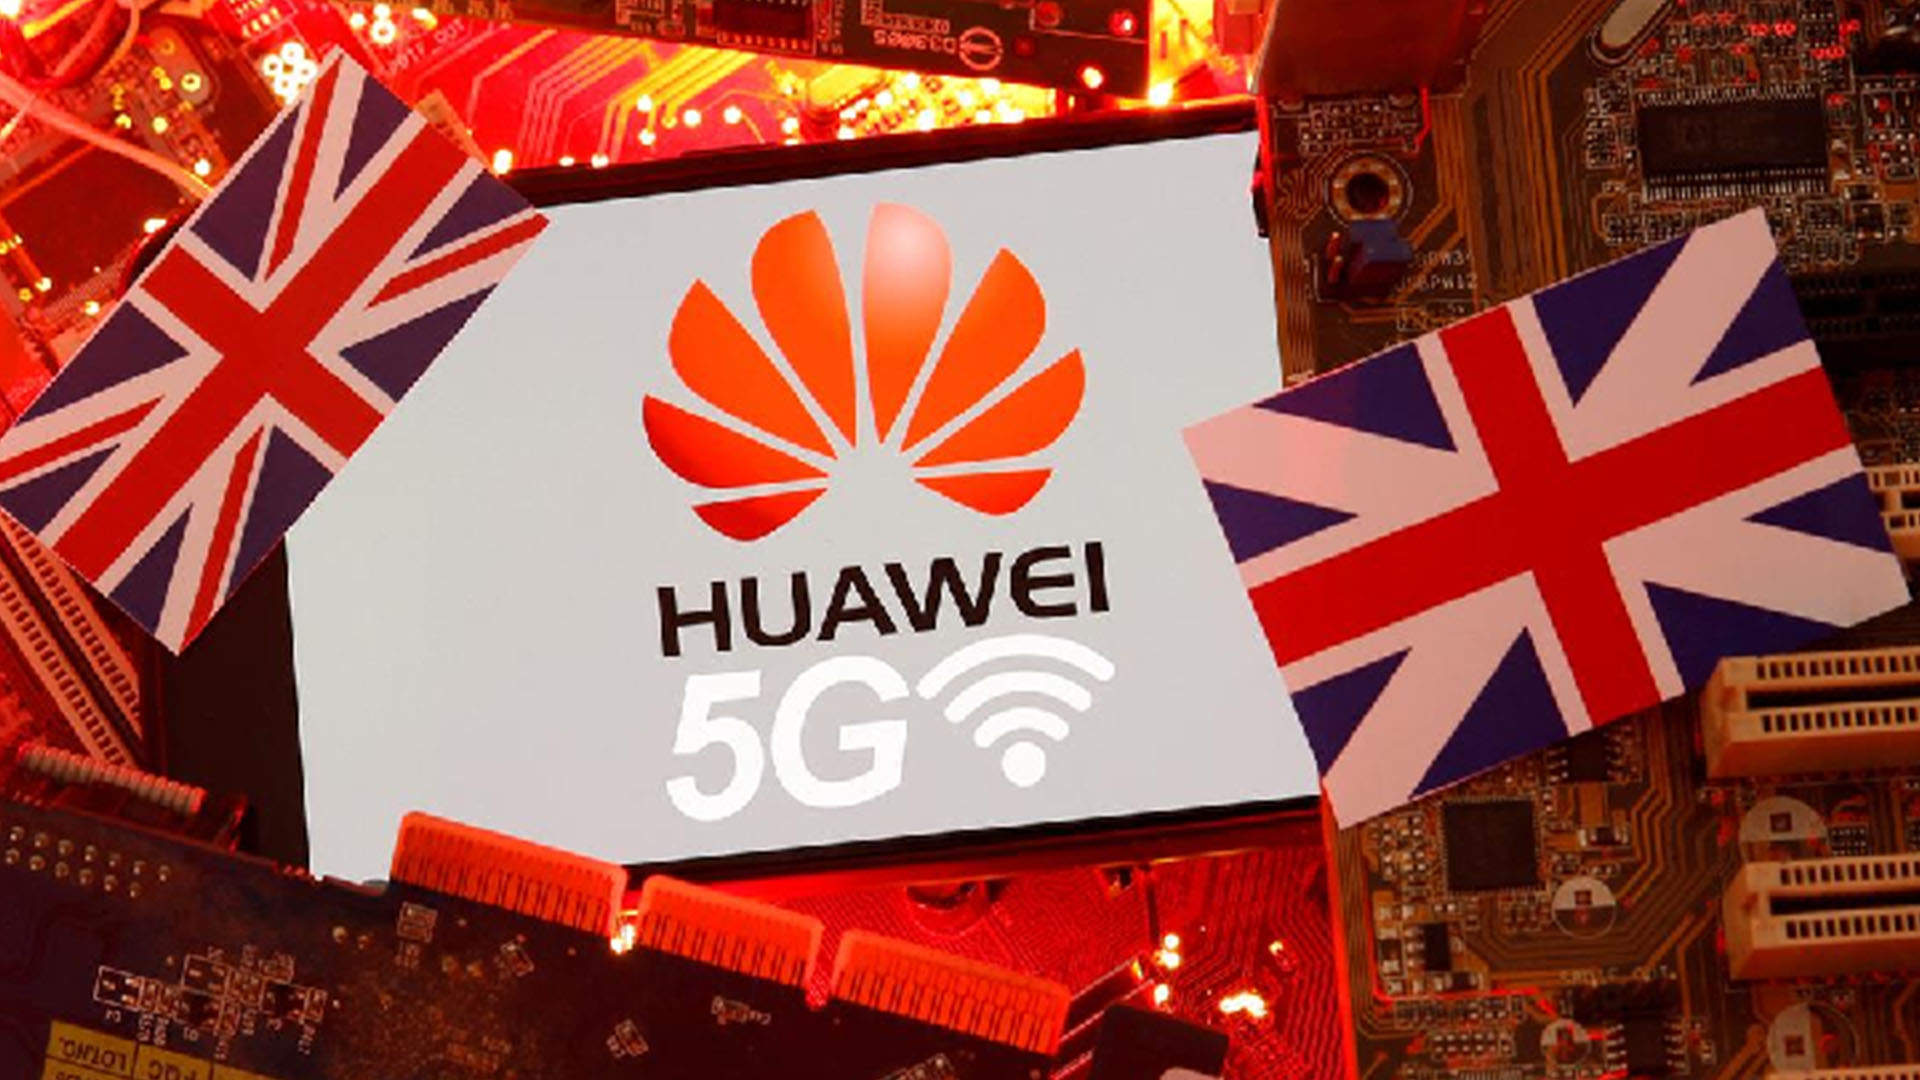 British Government to change decision on Huawei’s role in its 5G telecoms network